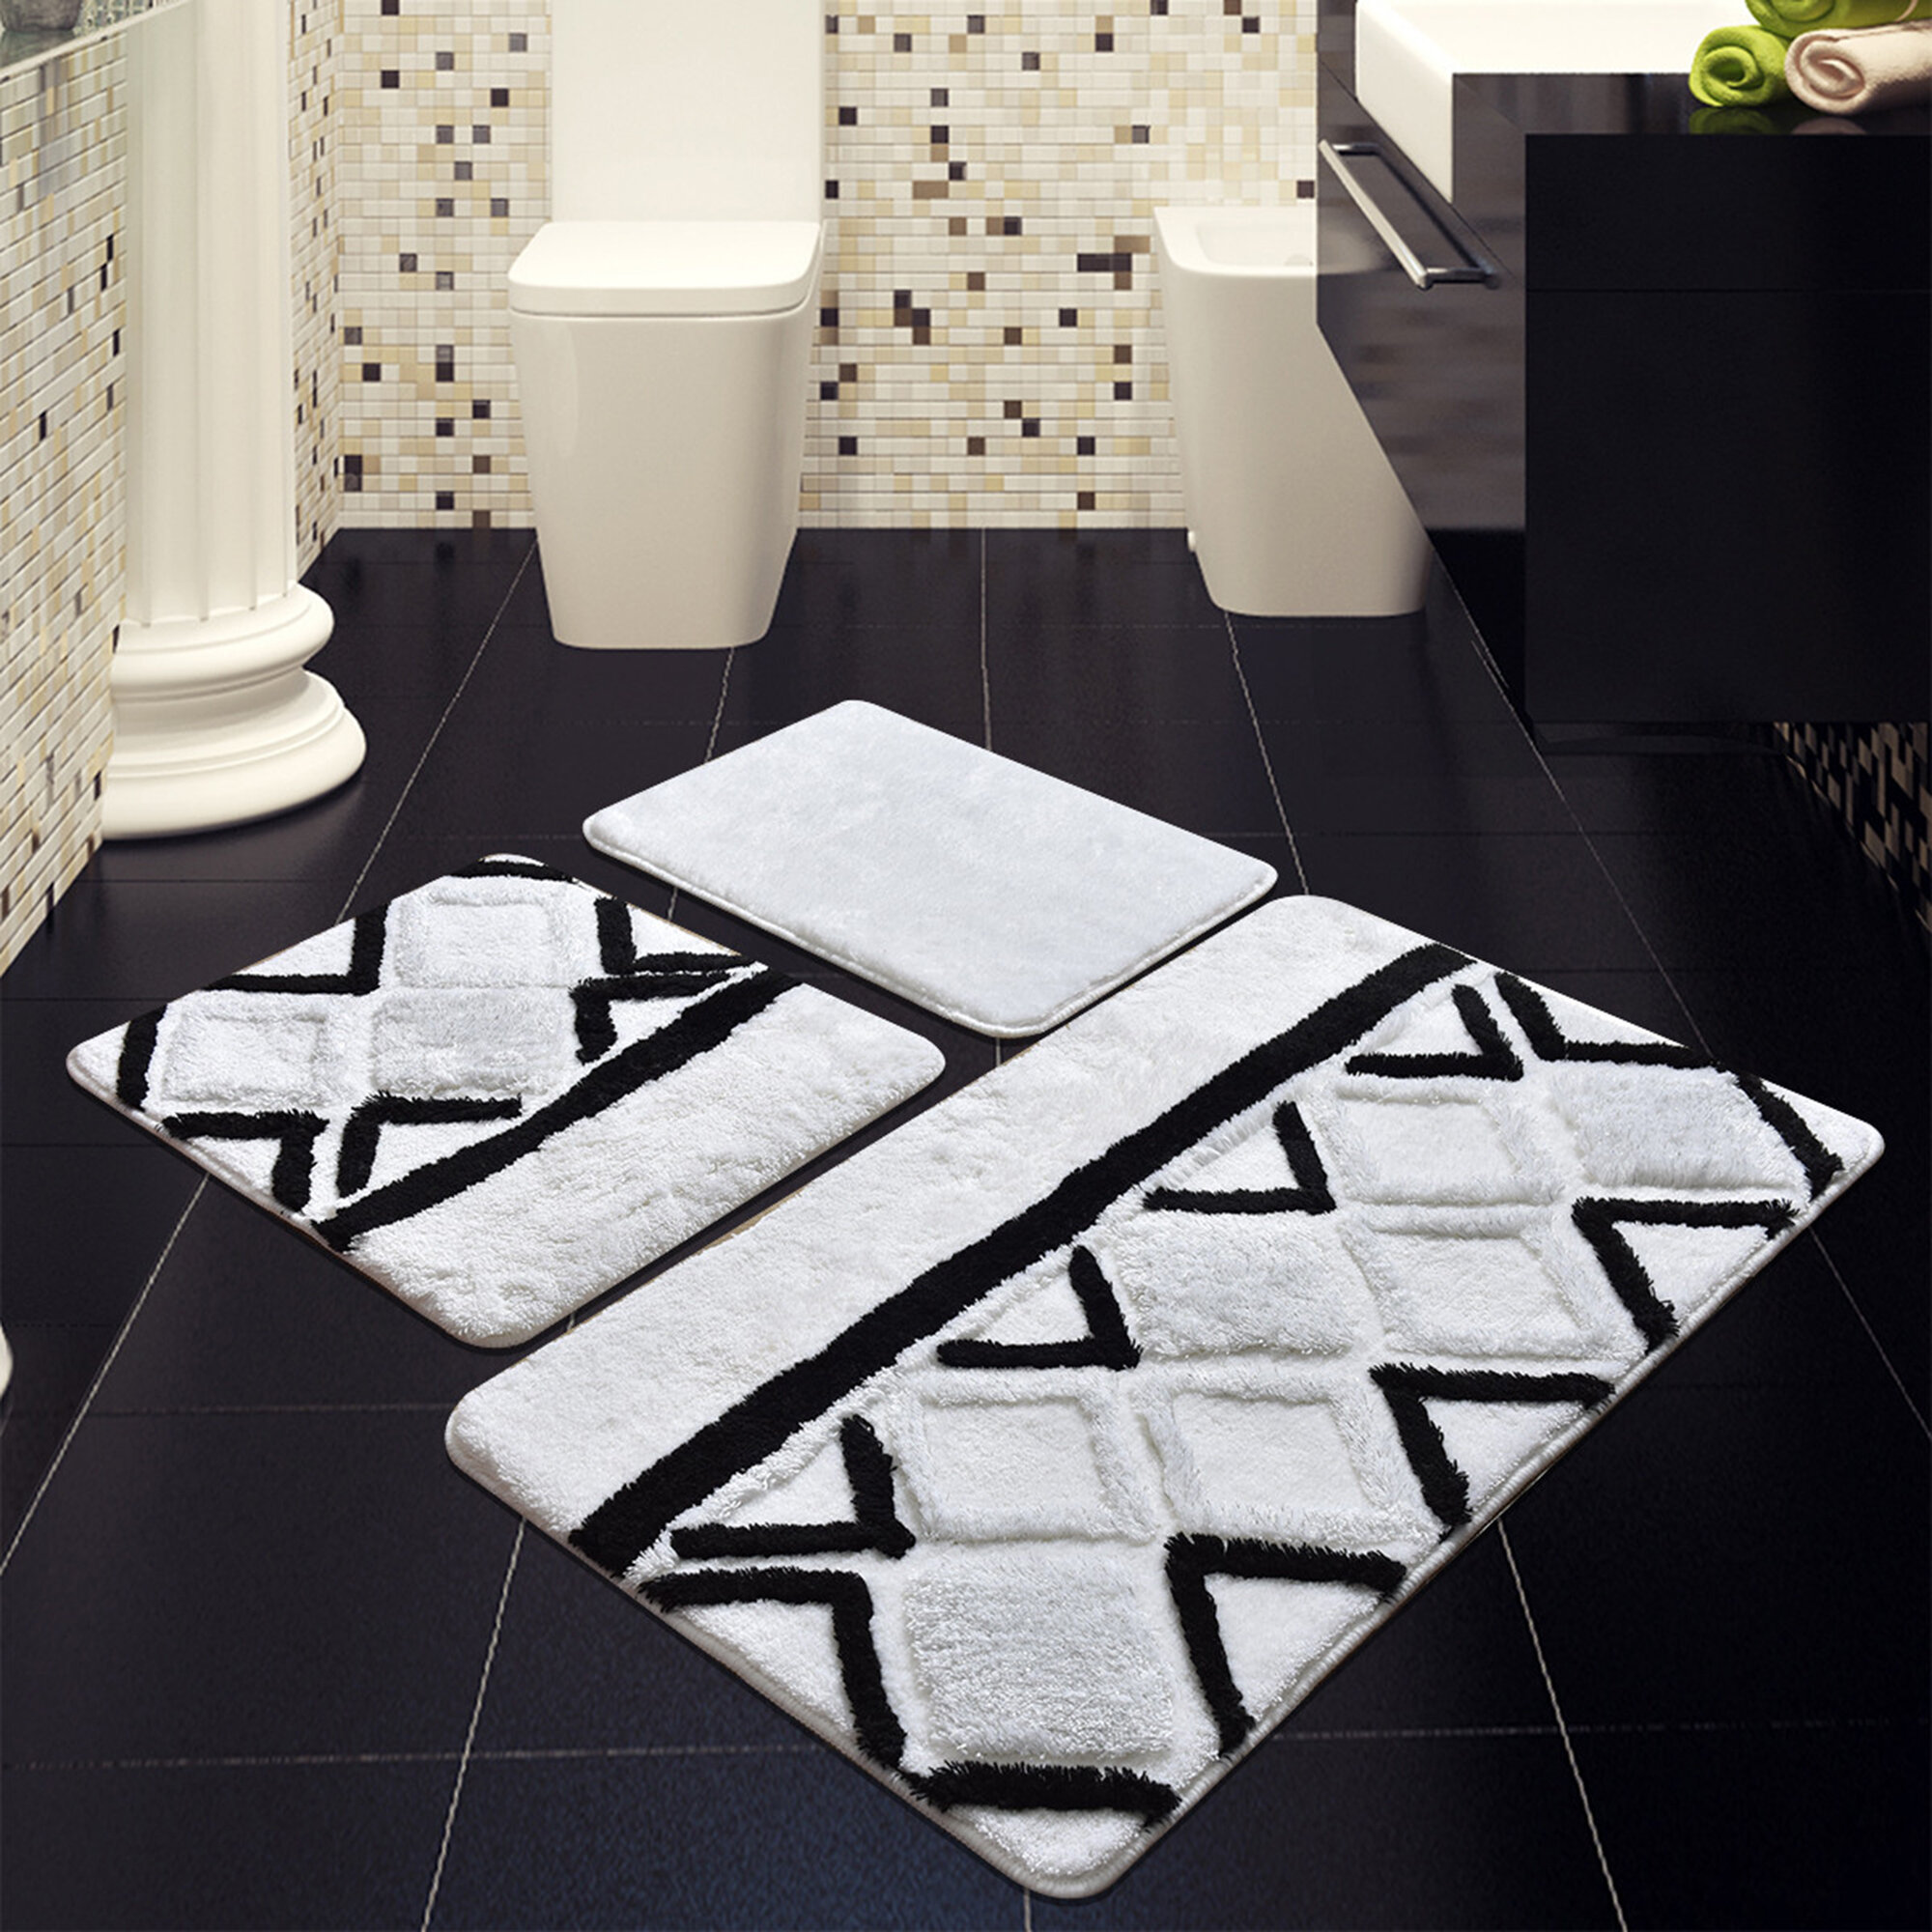 Bless international Bath Rug with Non-Slip Backing